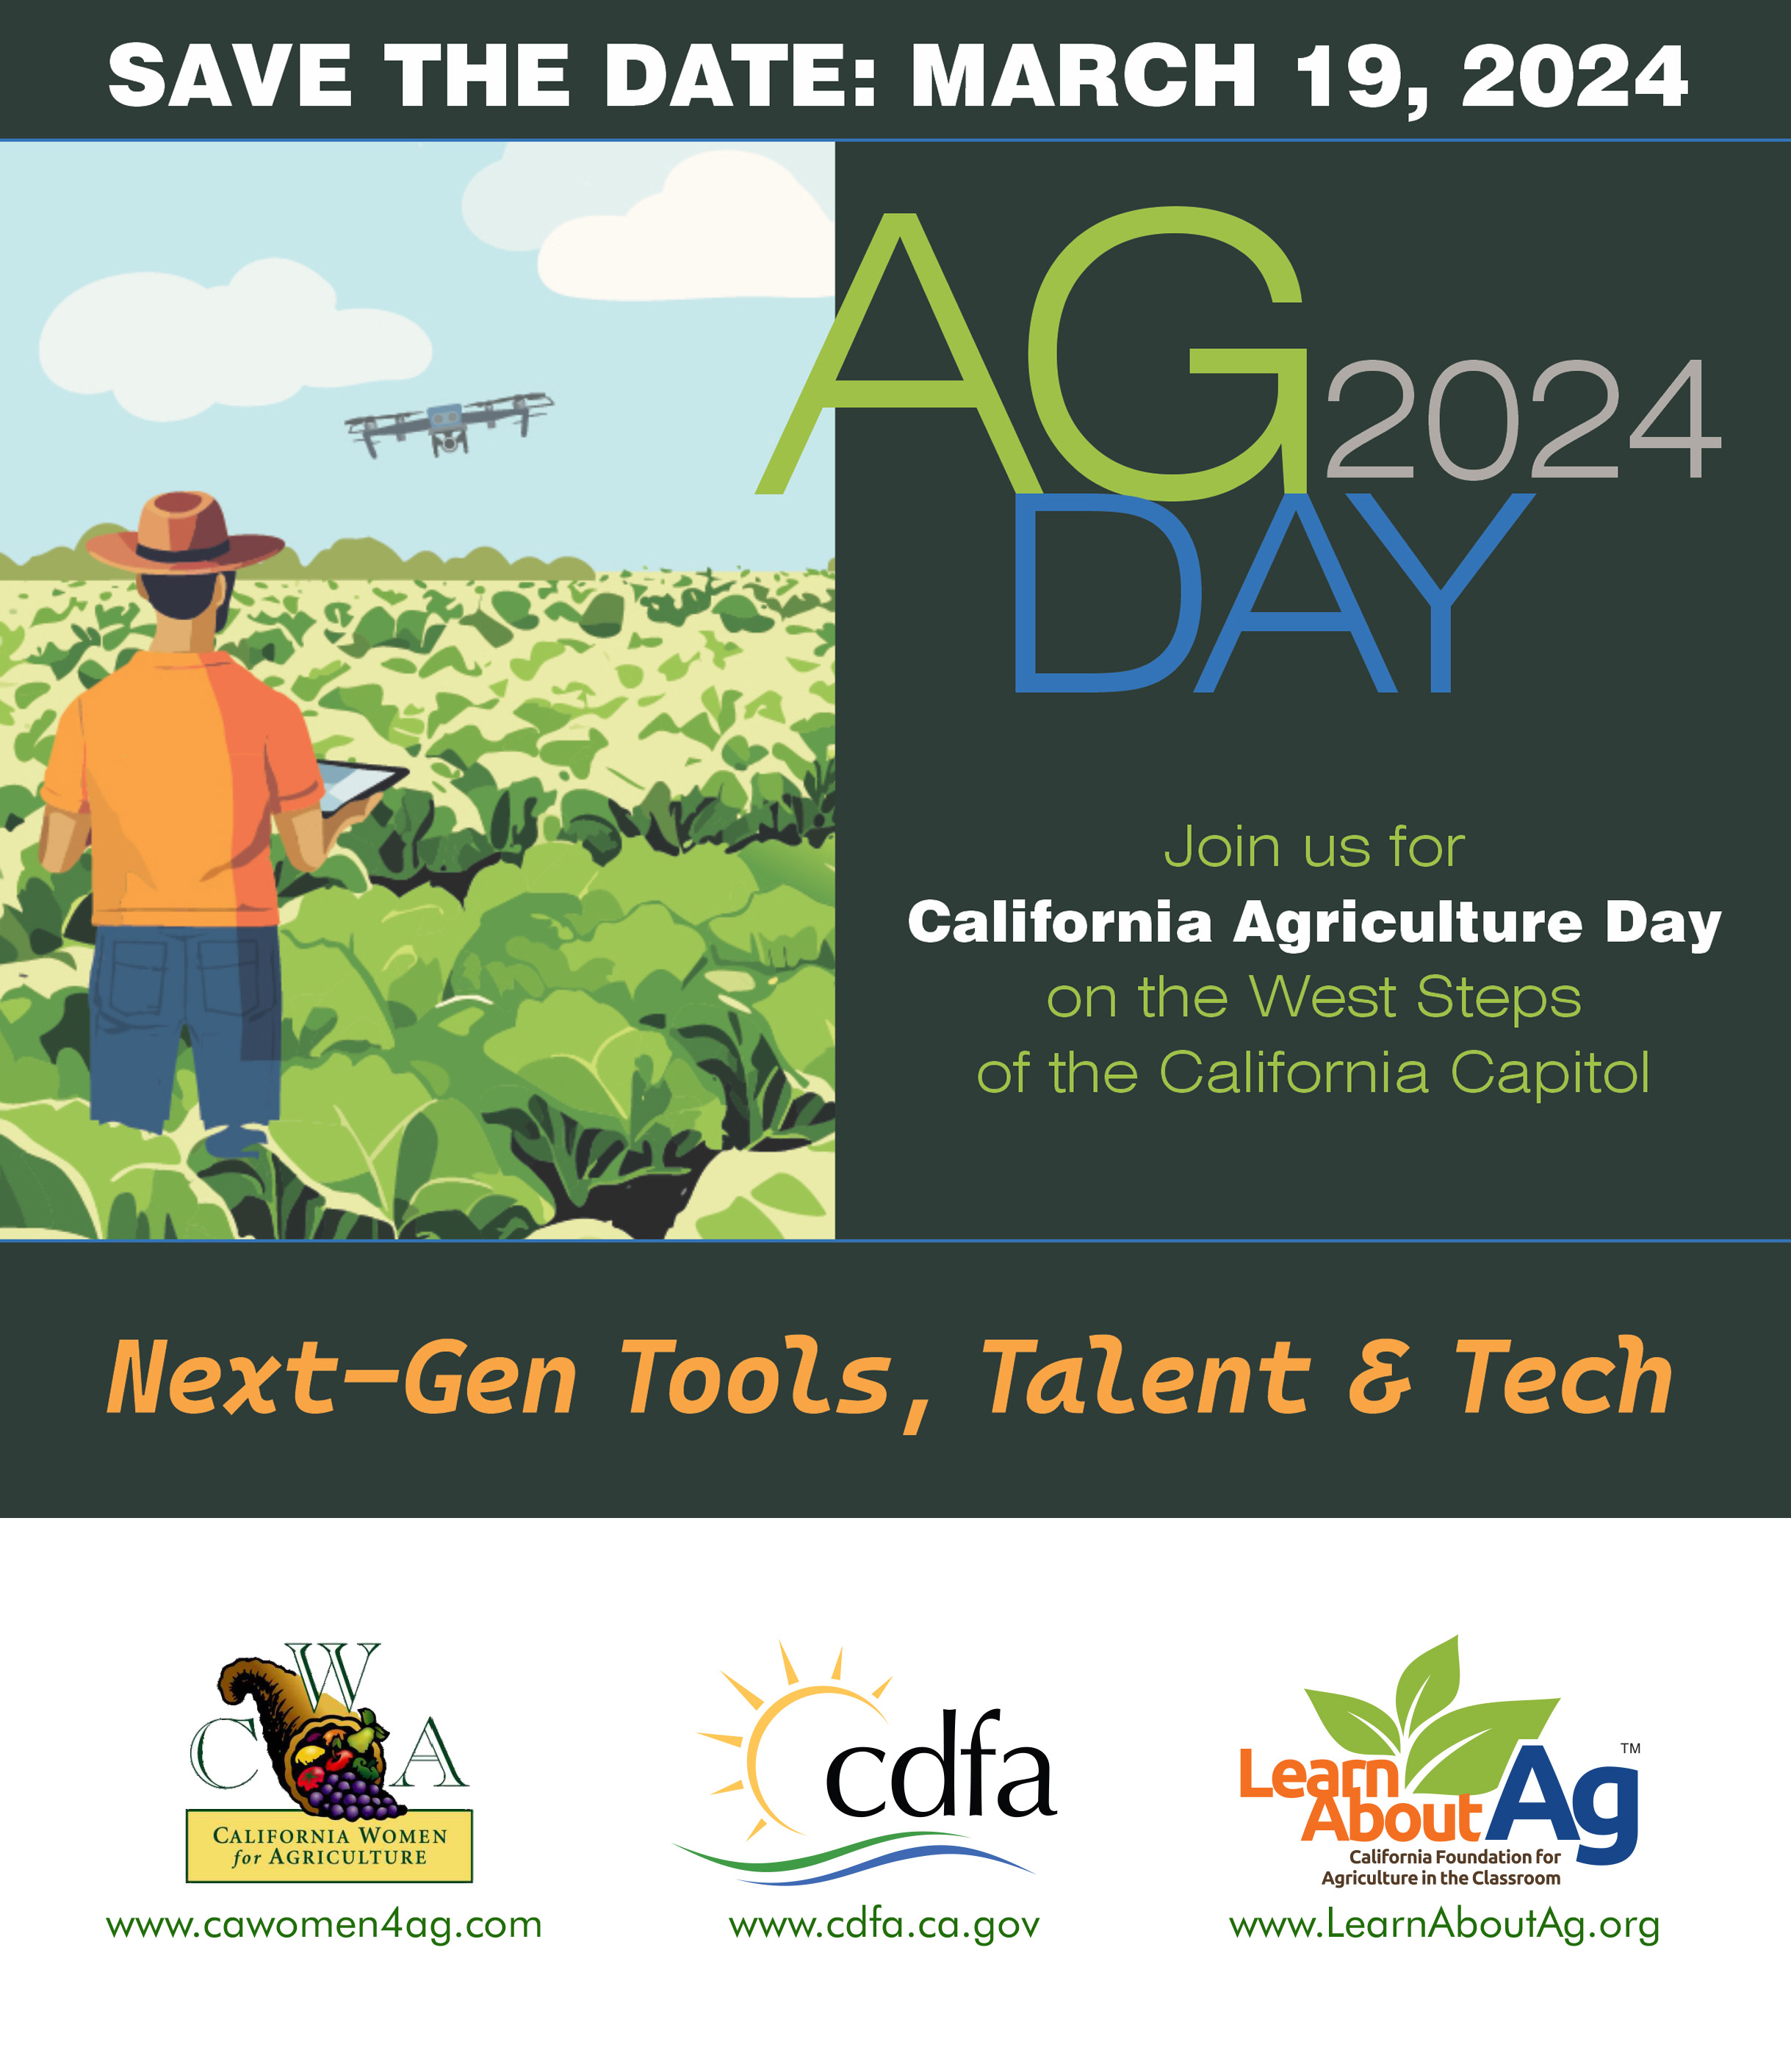 Ag Day 2024 on Tuesday, March 19, 2024